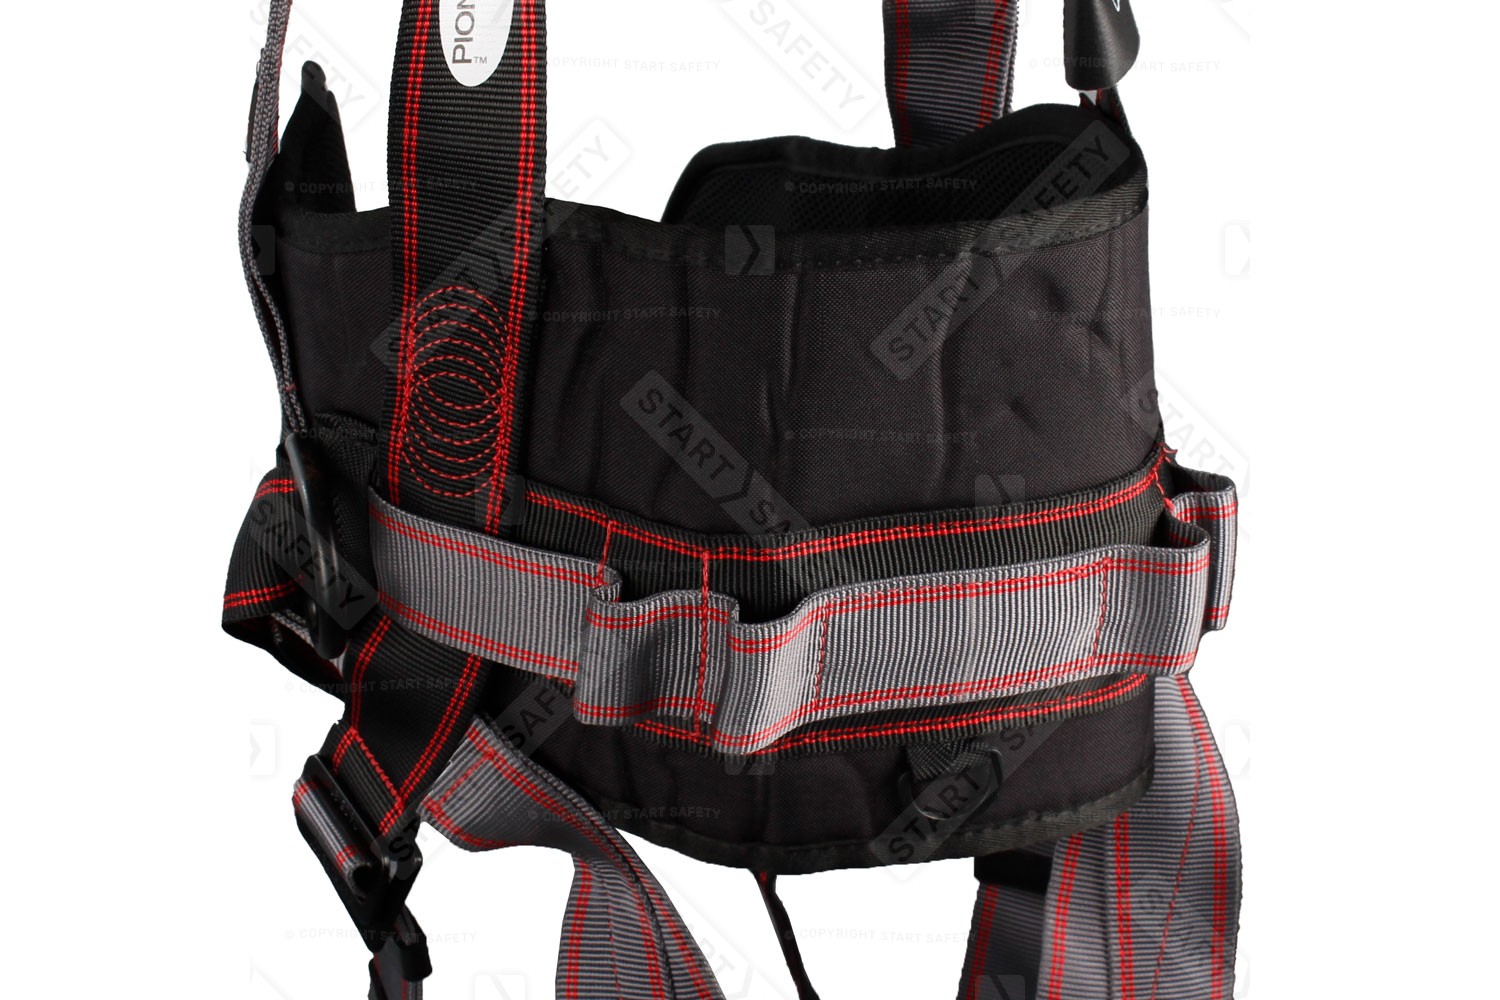 Comfortable And Supportive Work Positioning Belt On The 3-point JSP Pioneer Harness